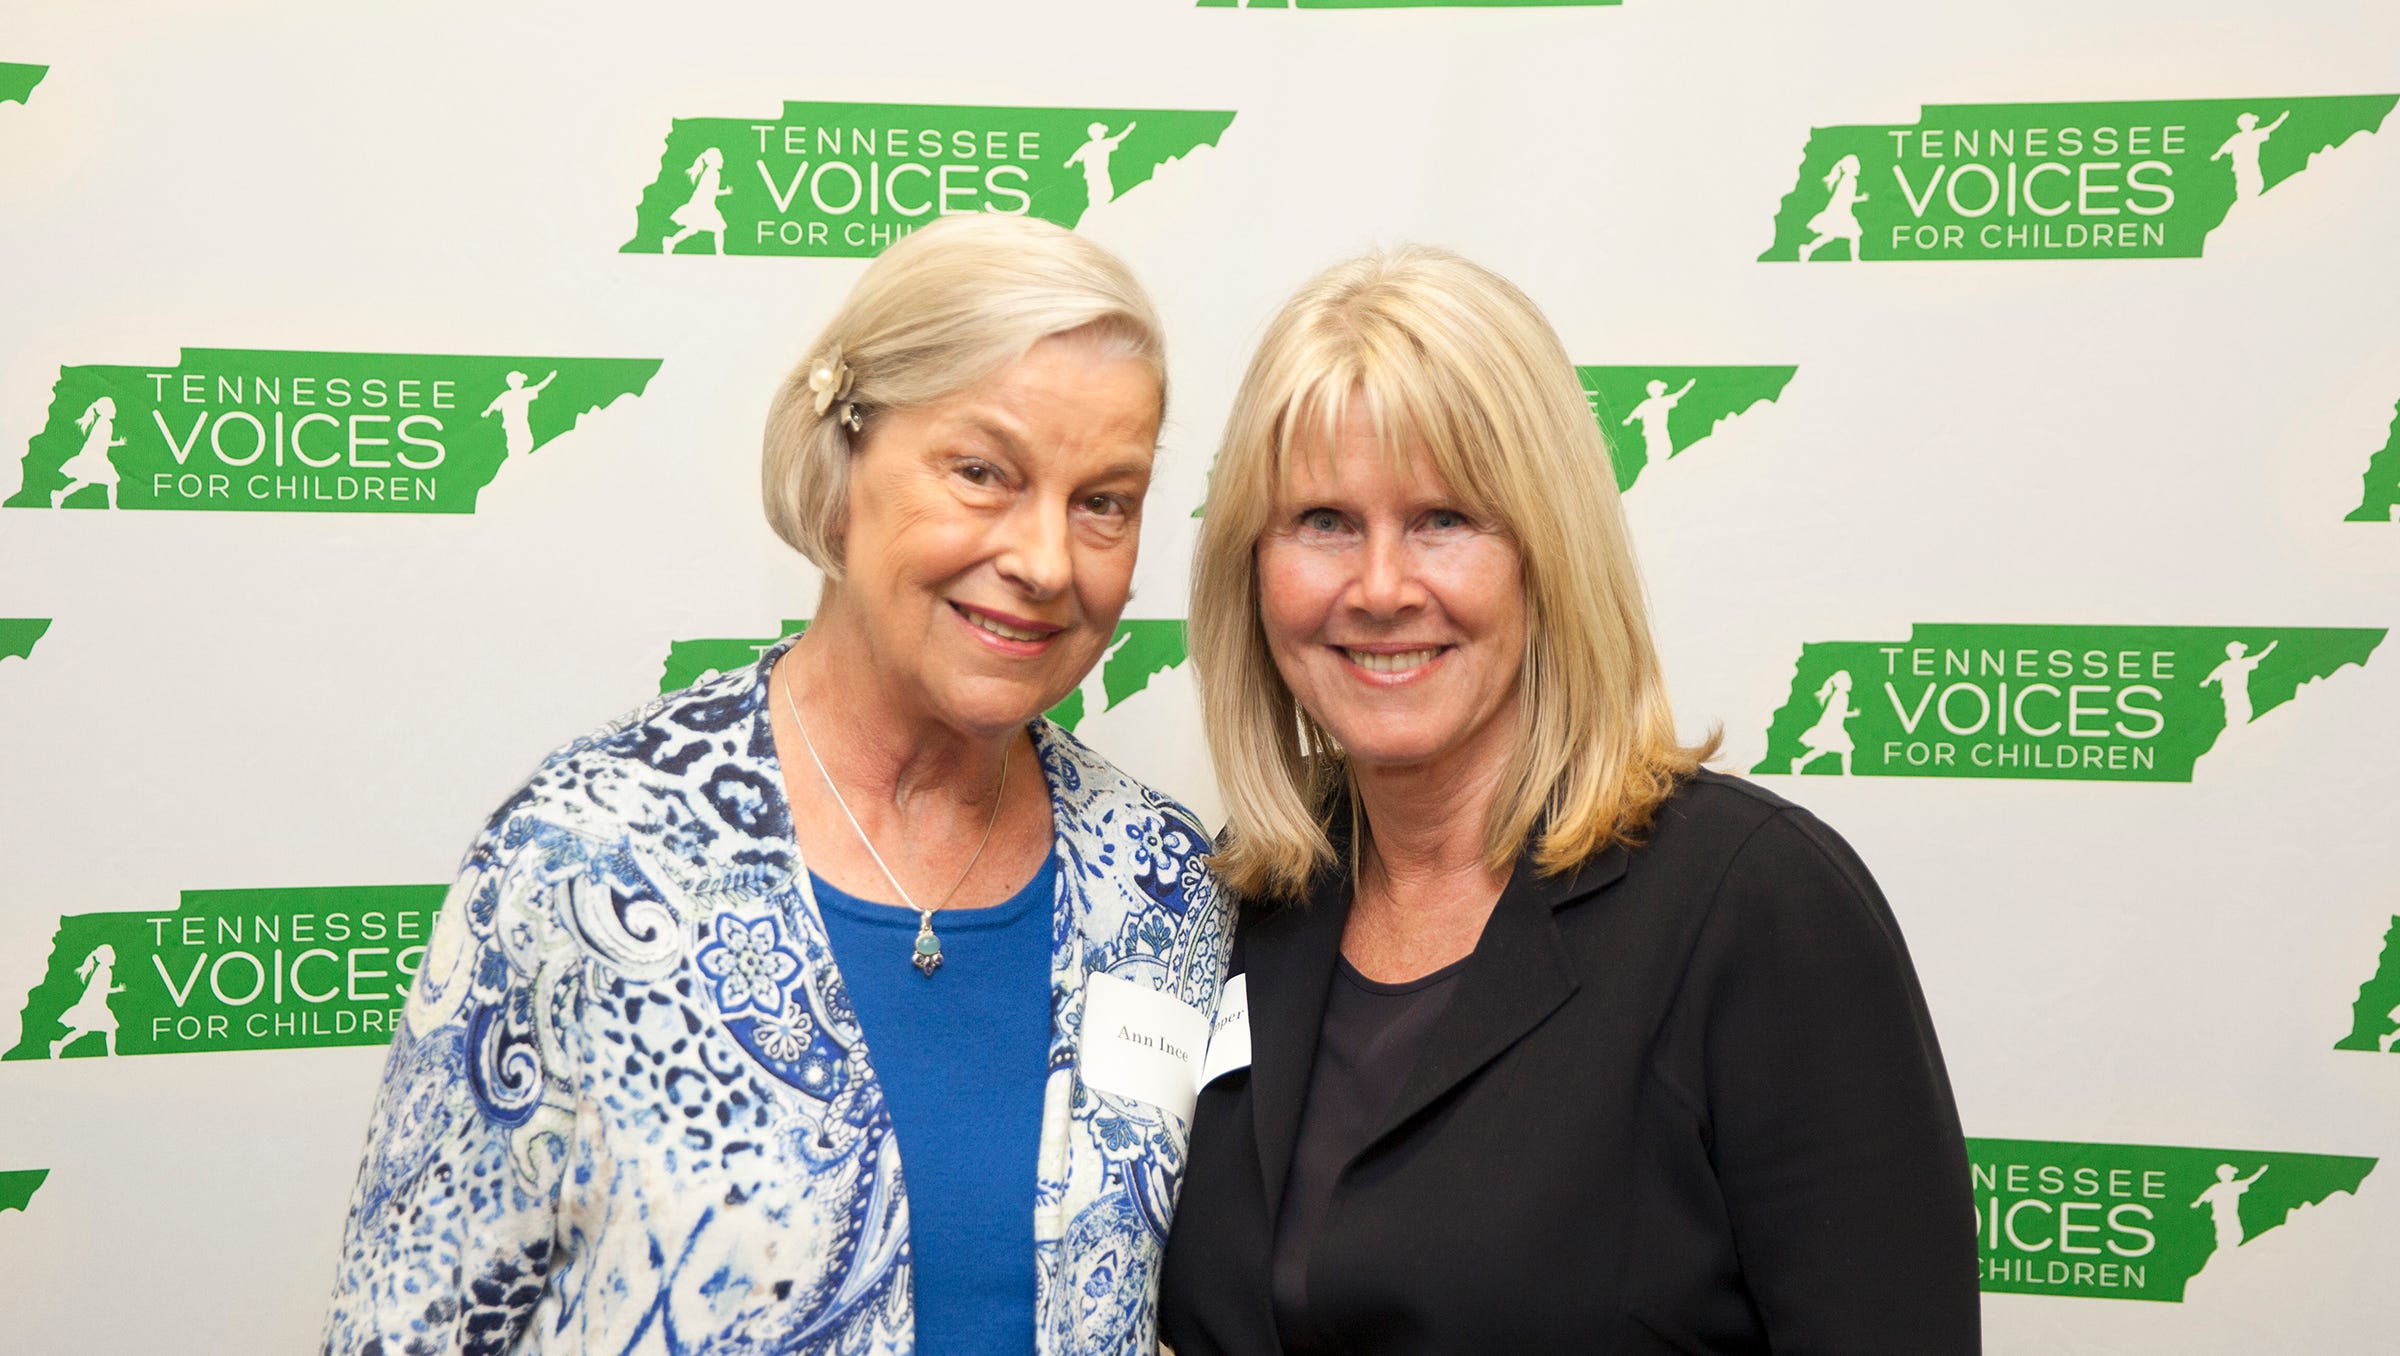 Ann Ince of Knoxville, left, attended a "meet and greet" with former Second Lady Tipper Gore at the Nashville offices of the Tennessee Voices for Children on Nov. 4, 2016. The two women used to work on mental health services together in Washington, D.C. and then Ince followed Gore as president of the board of the statewide organization, which serves 50,000 children, youth, families and child-serving providers. The reception preceded a fund-raising gala on Nov. 5 where Gore was keynote speaker. Laura Whitfield for Tennessee Voices for Children